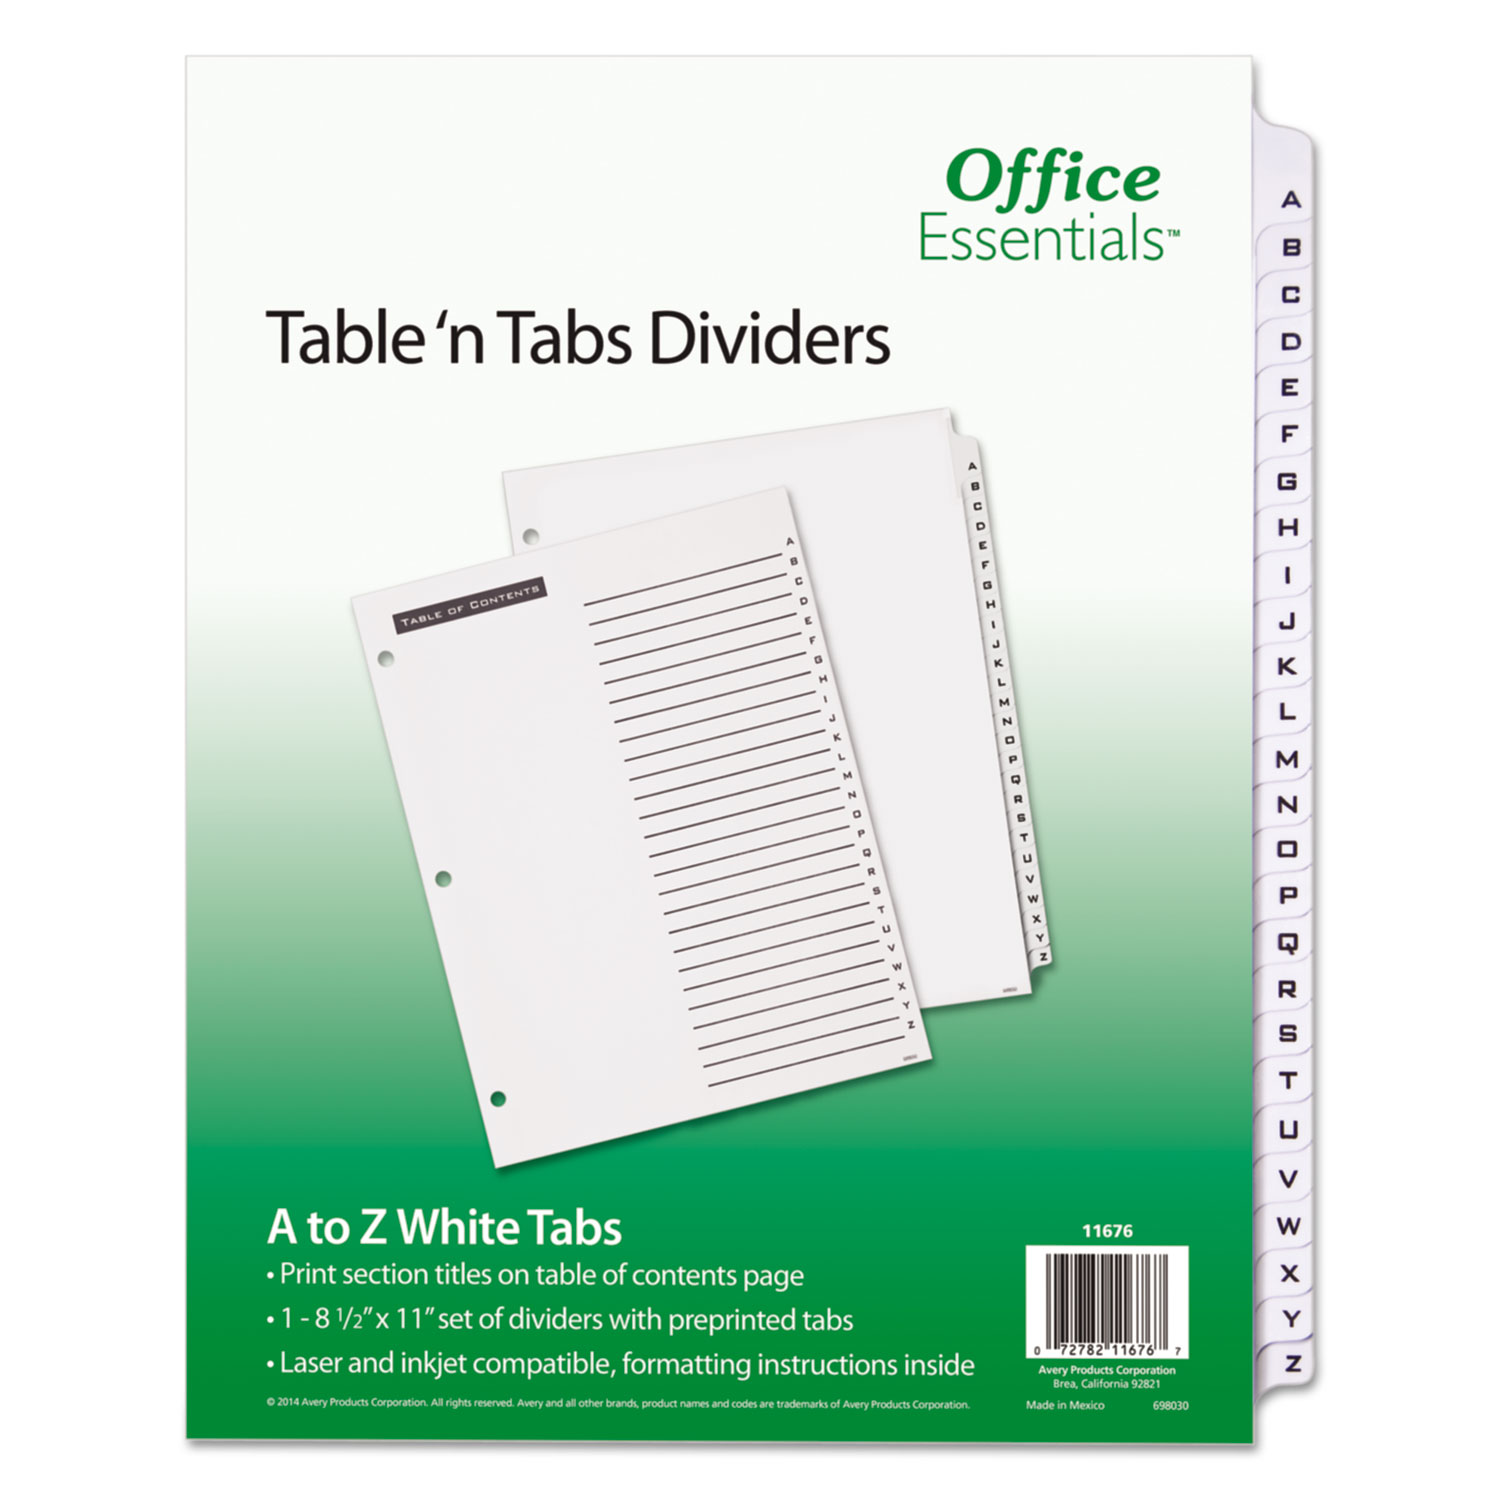  Office Essentials 11676 Table 'n Tabs Dividers, 26-Tab, A to Z, 11 x 8.5, White, 1 Set (AVE11676) 